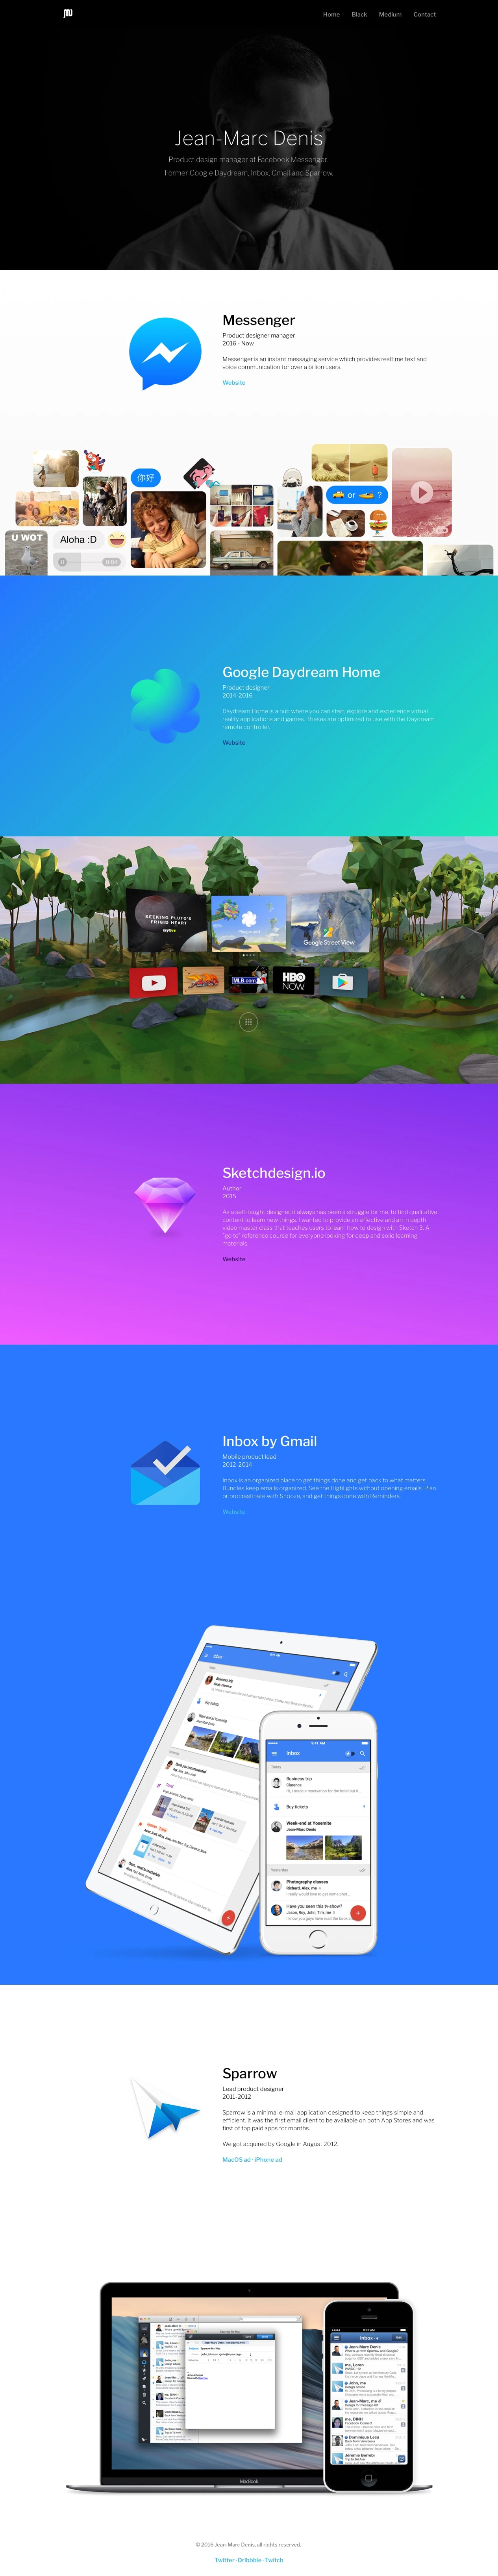 Jean-Marc Denis Landing Page Example: Product design manager at Facebook Messenger. Former Google Daydream, Inbox, Gmail and Sparrow.